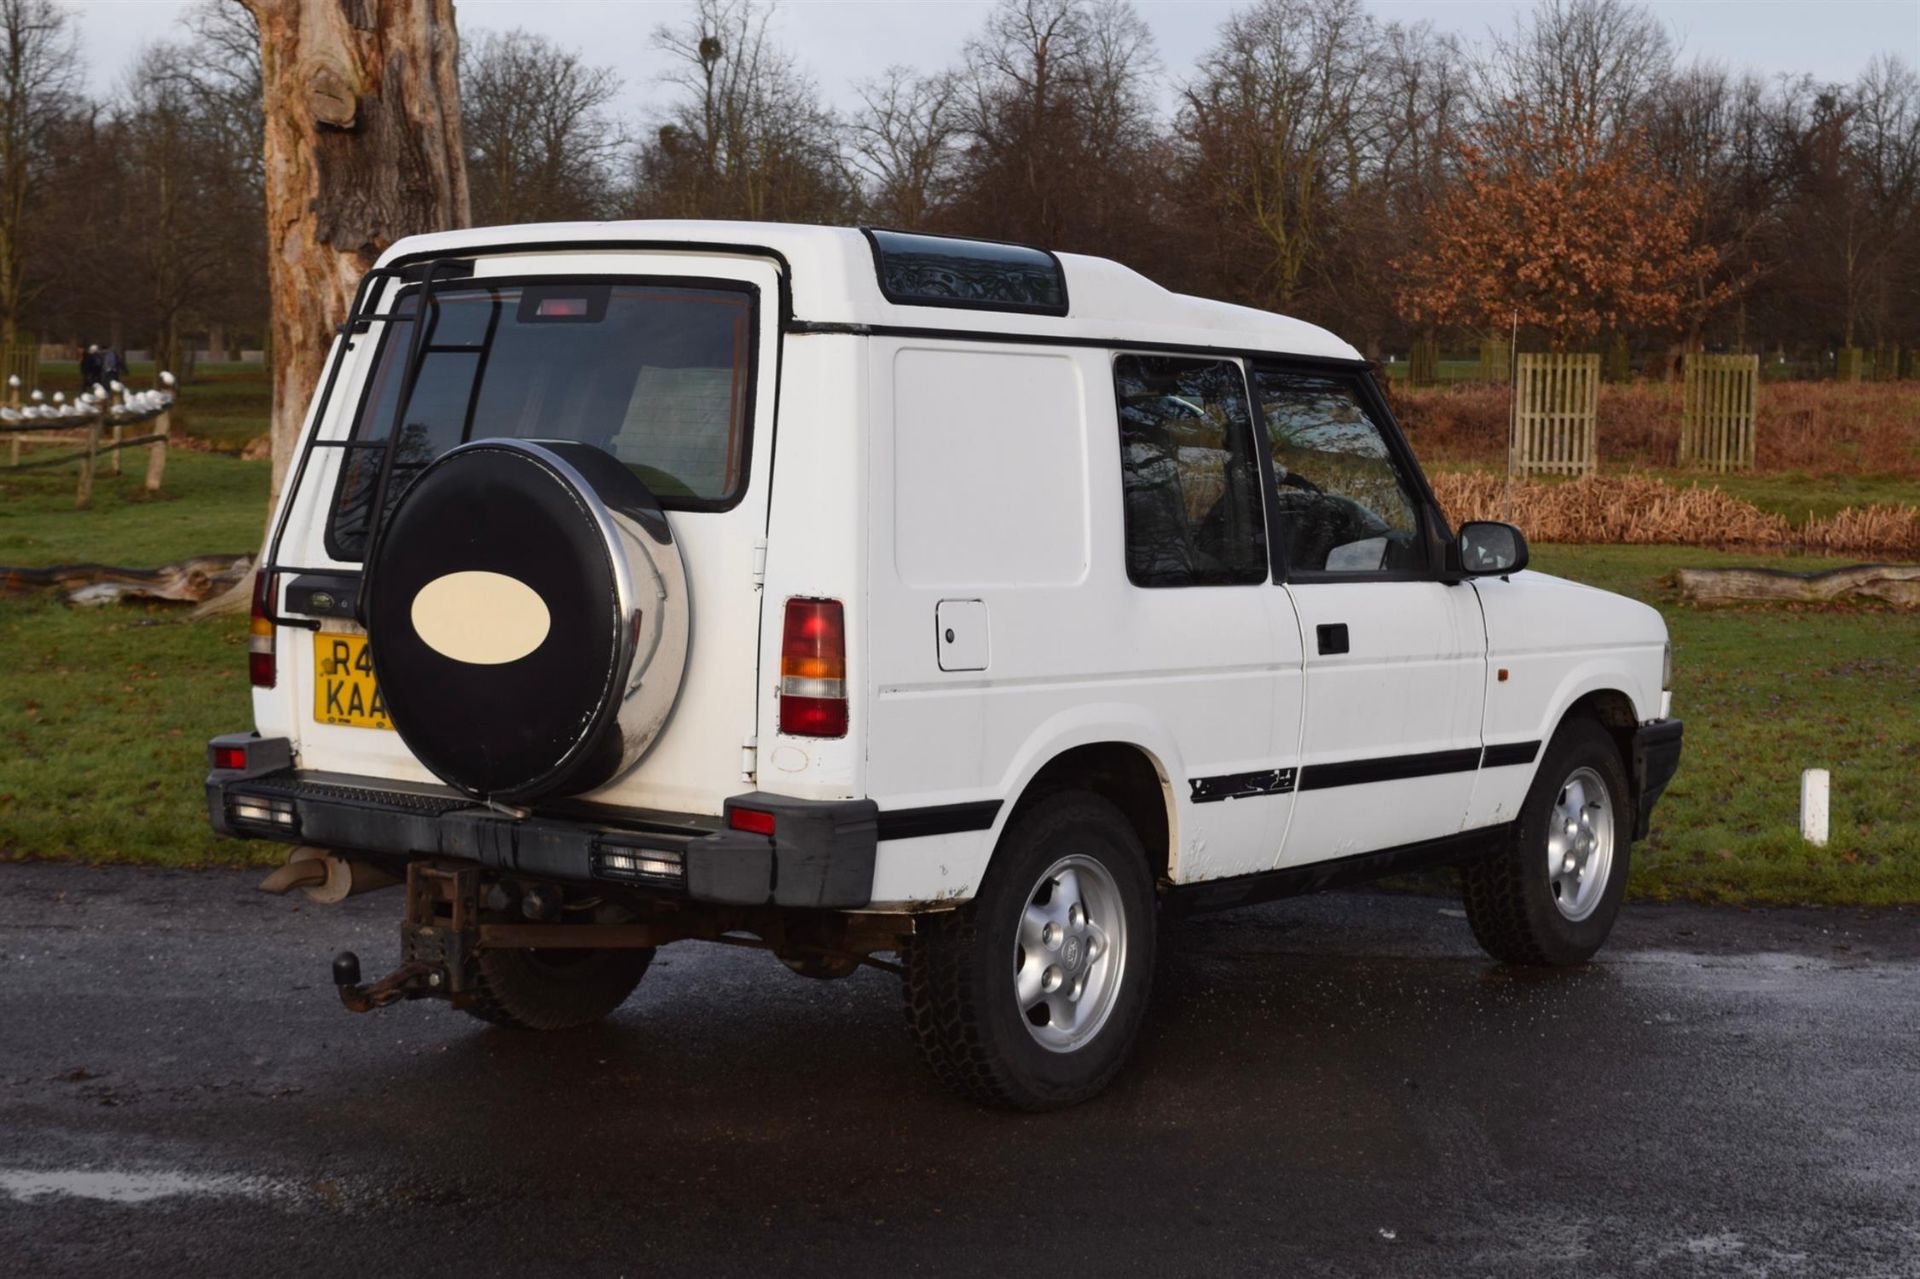 1998 Land Rover Discovery 2-Door R41 KAA. 2-door Land Rover Discovery 300 TDI, which was first - Image 31 of 41